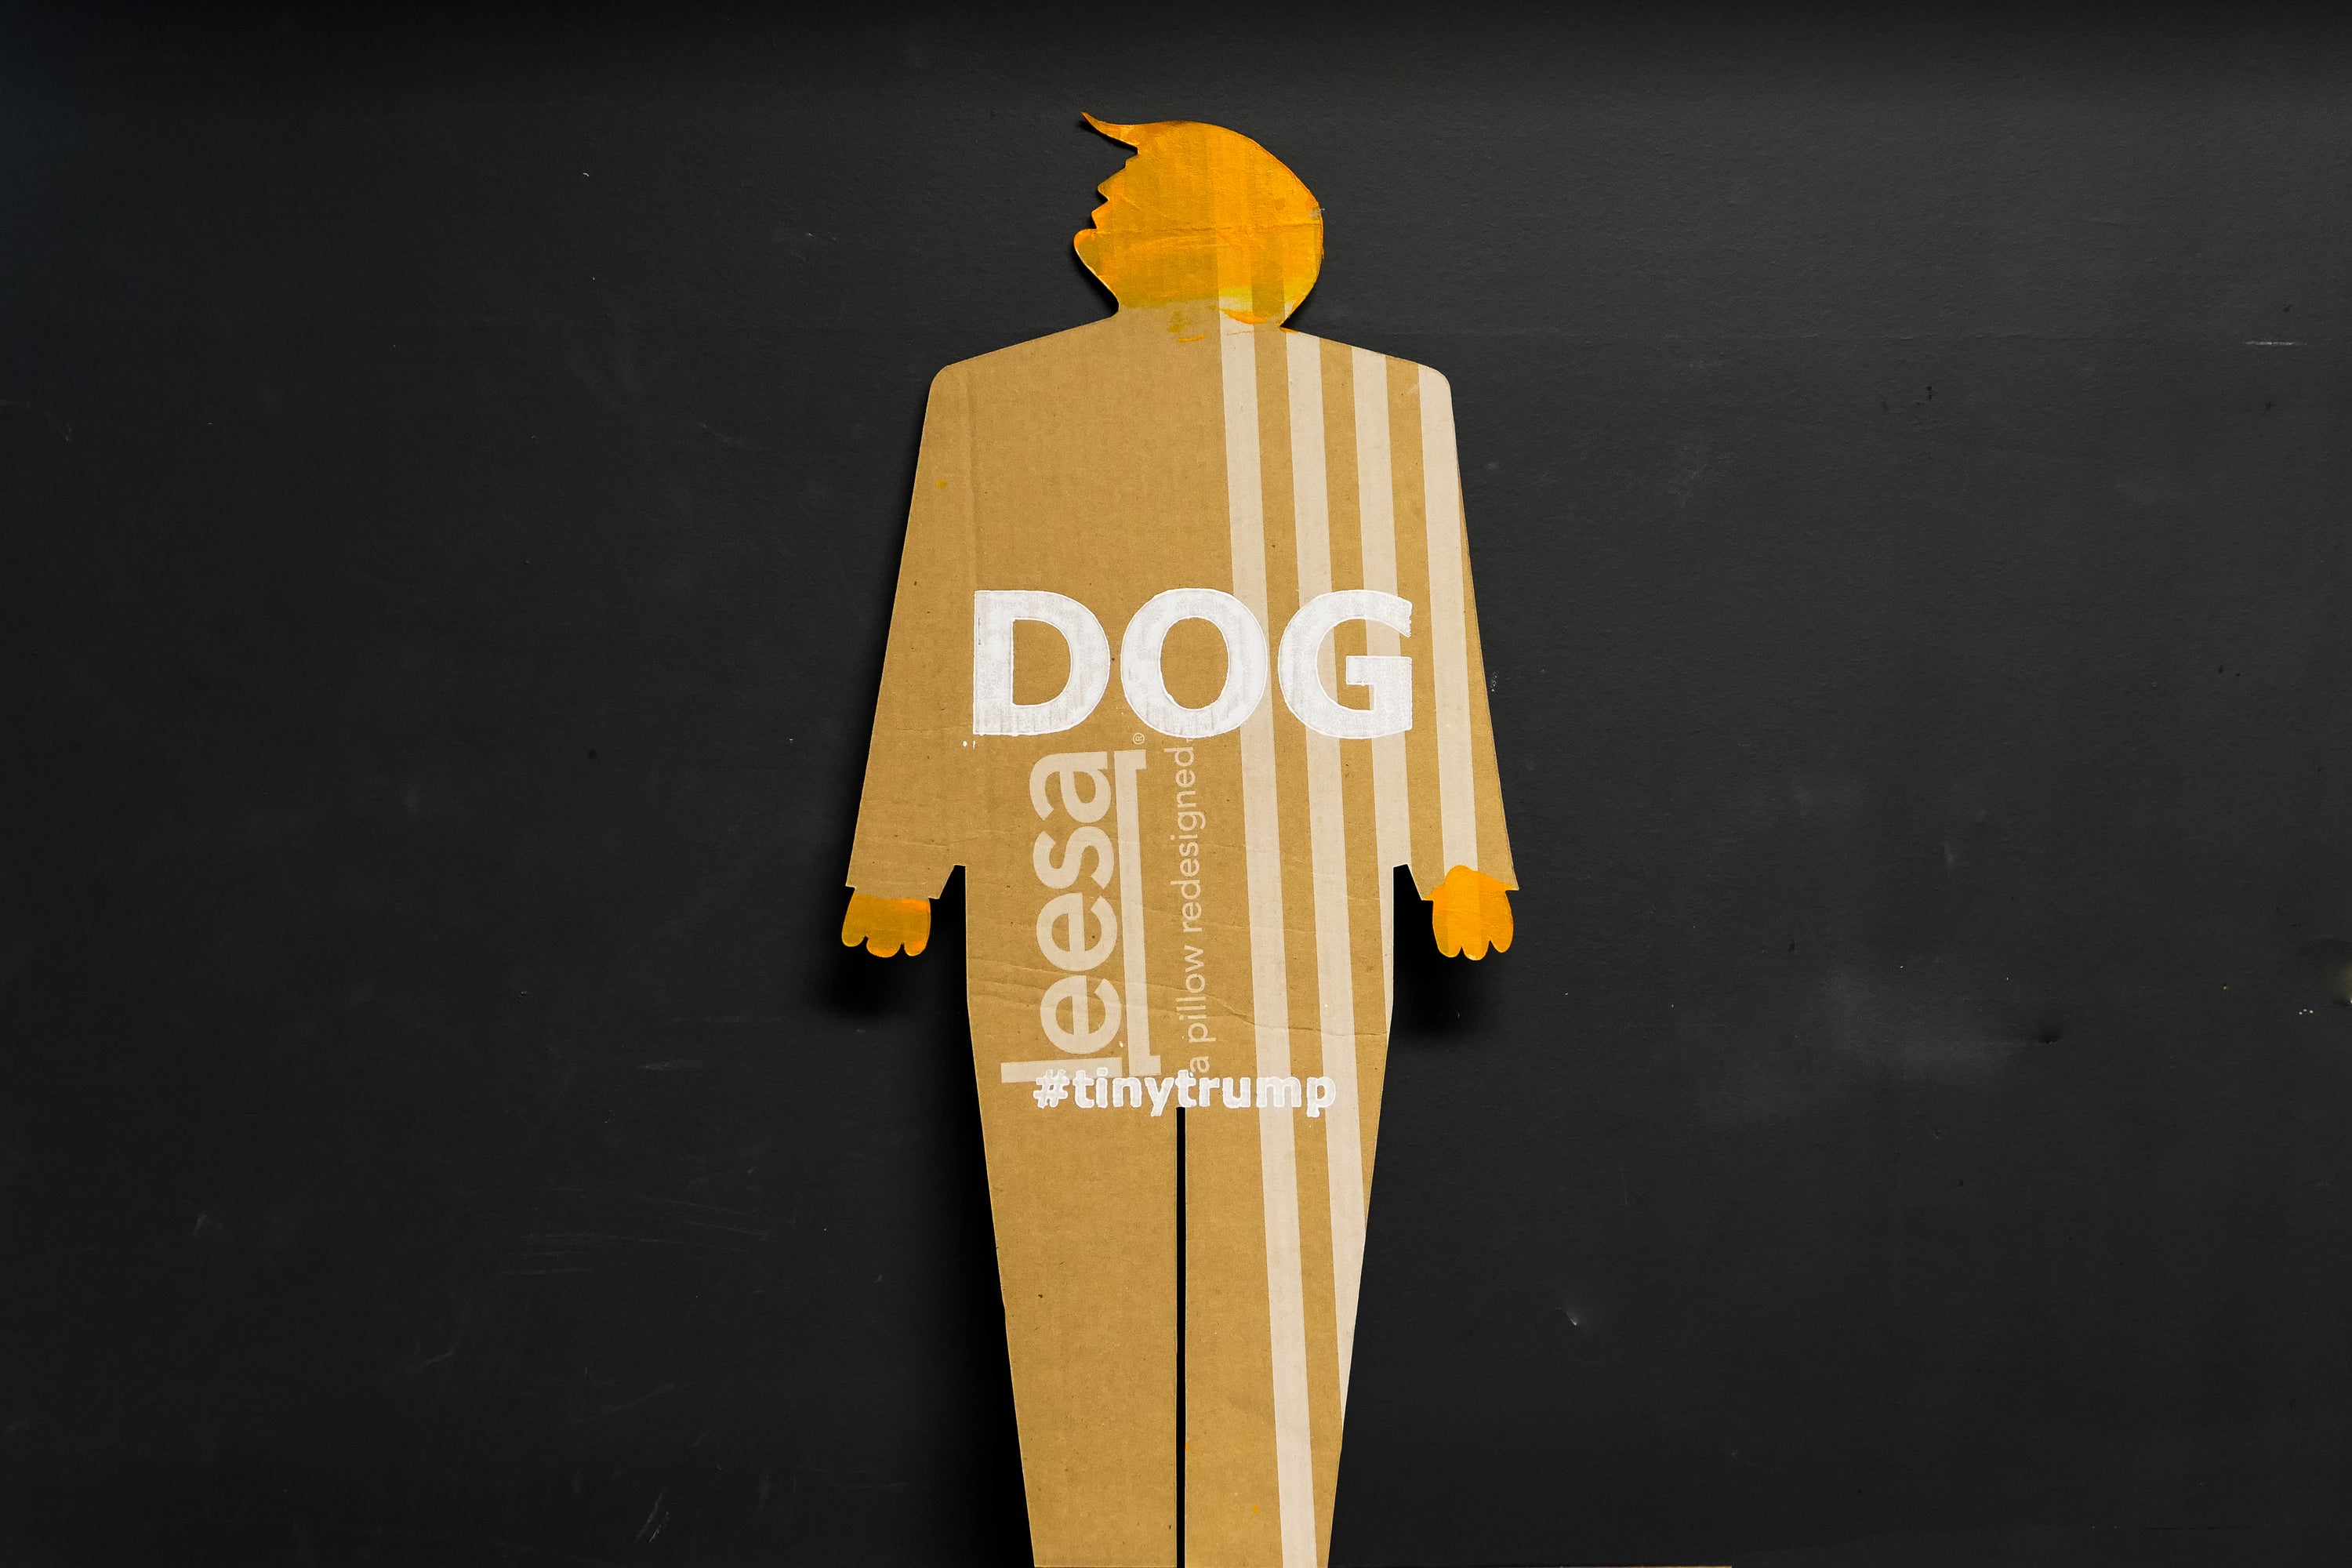 A two foot tall, cardboard tiny trump with the slogan "Dog"